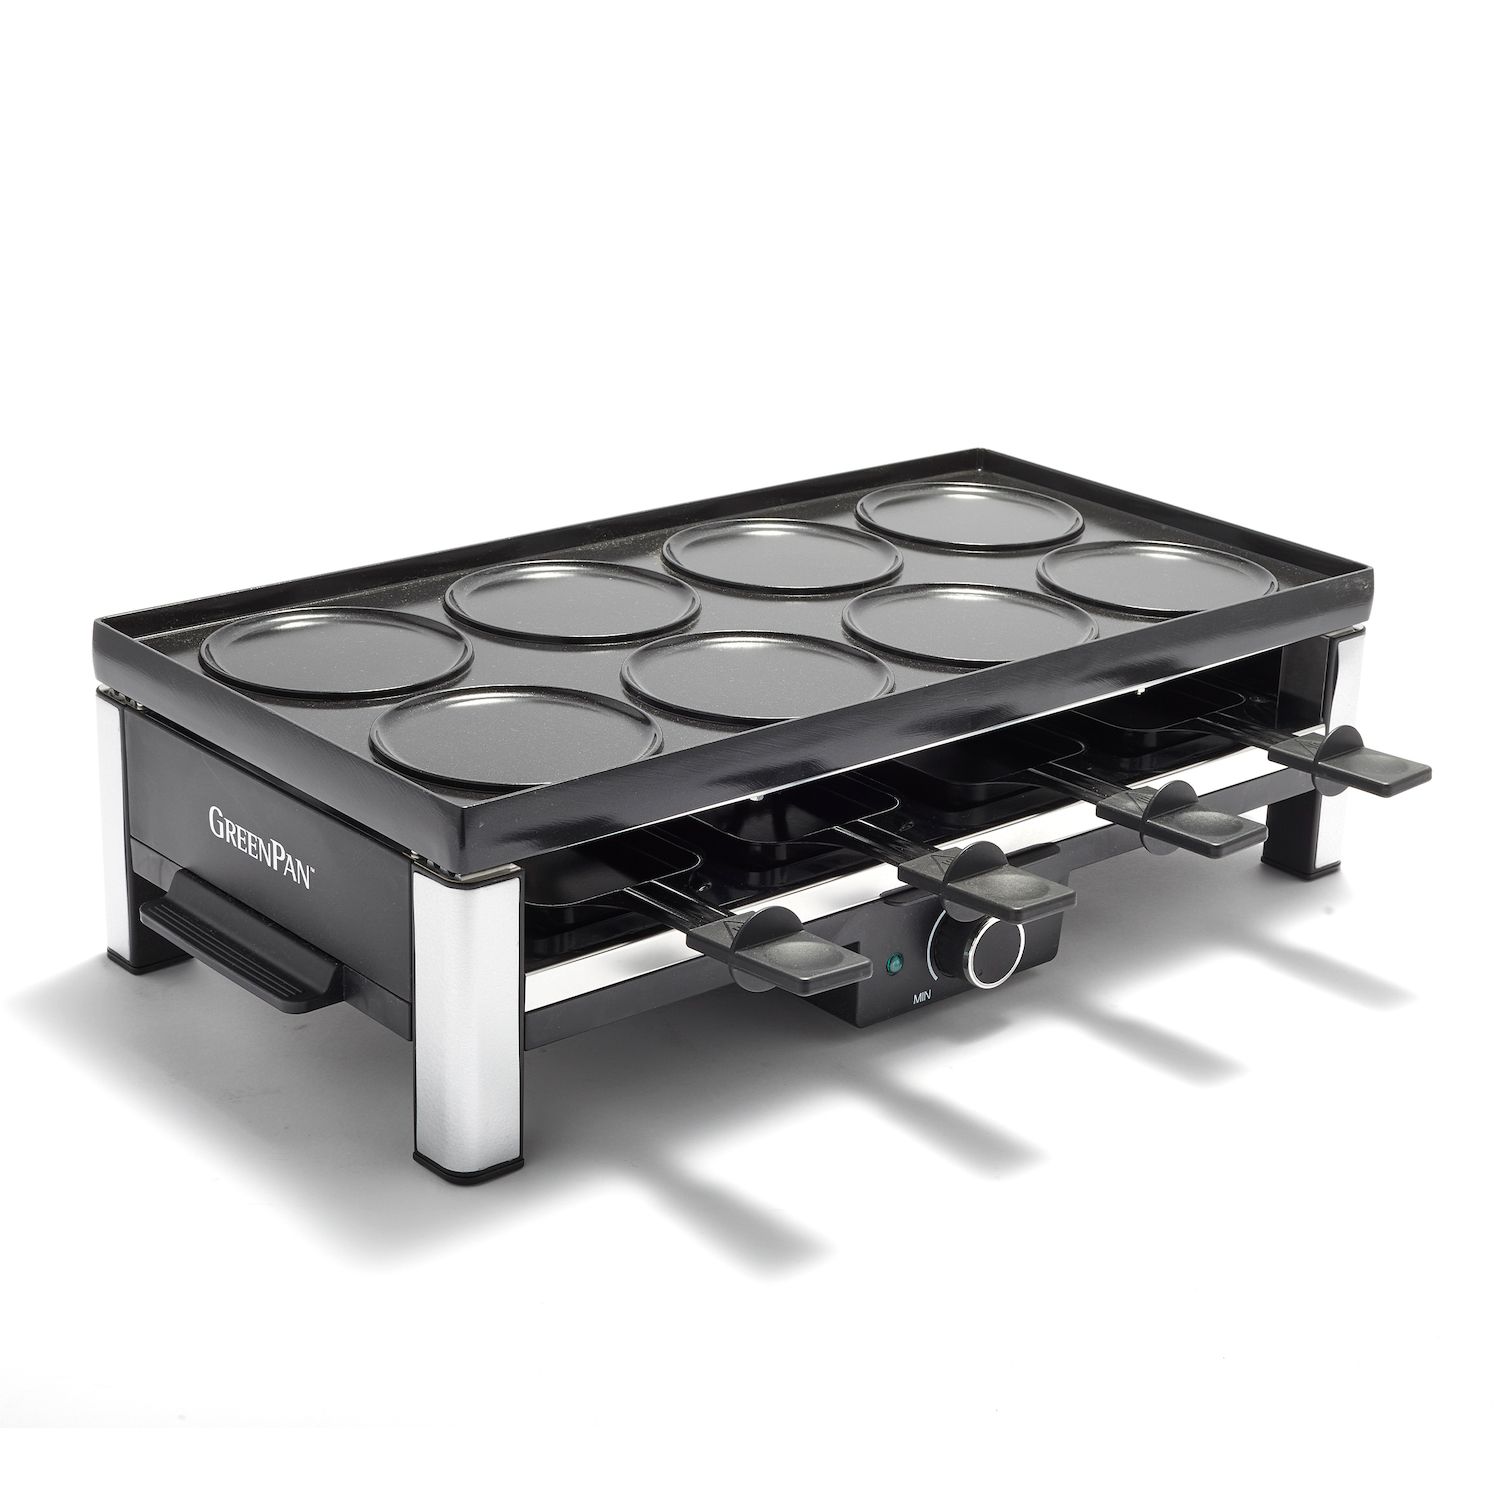 Todd English Collection Greenpan Square Nonstick Grill Griddle Pan